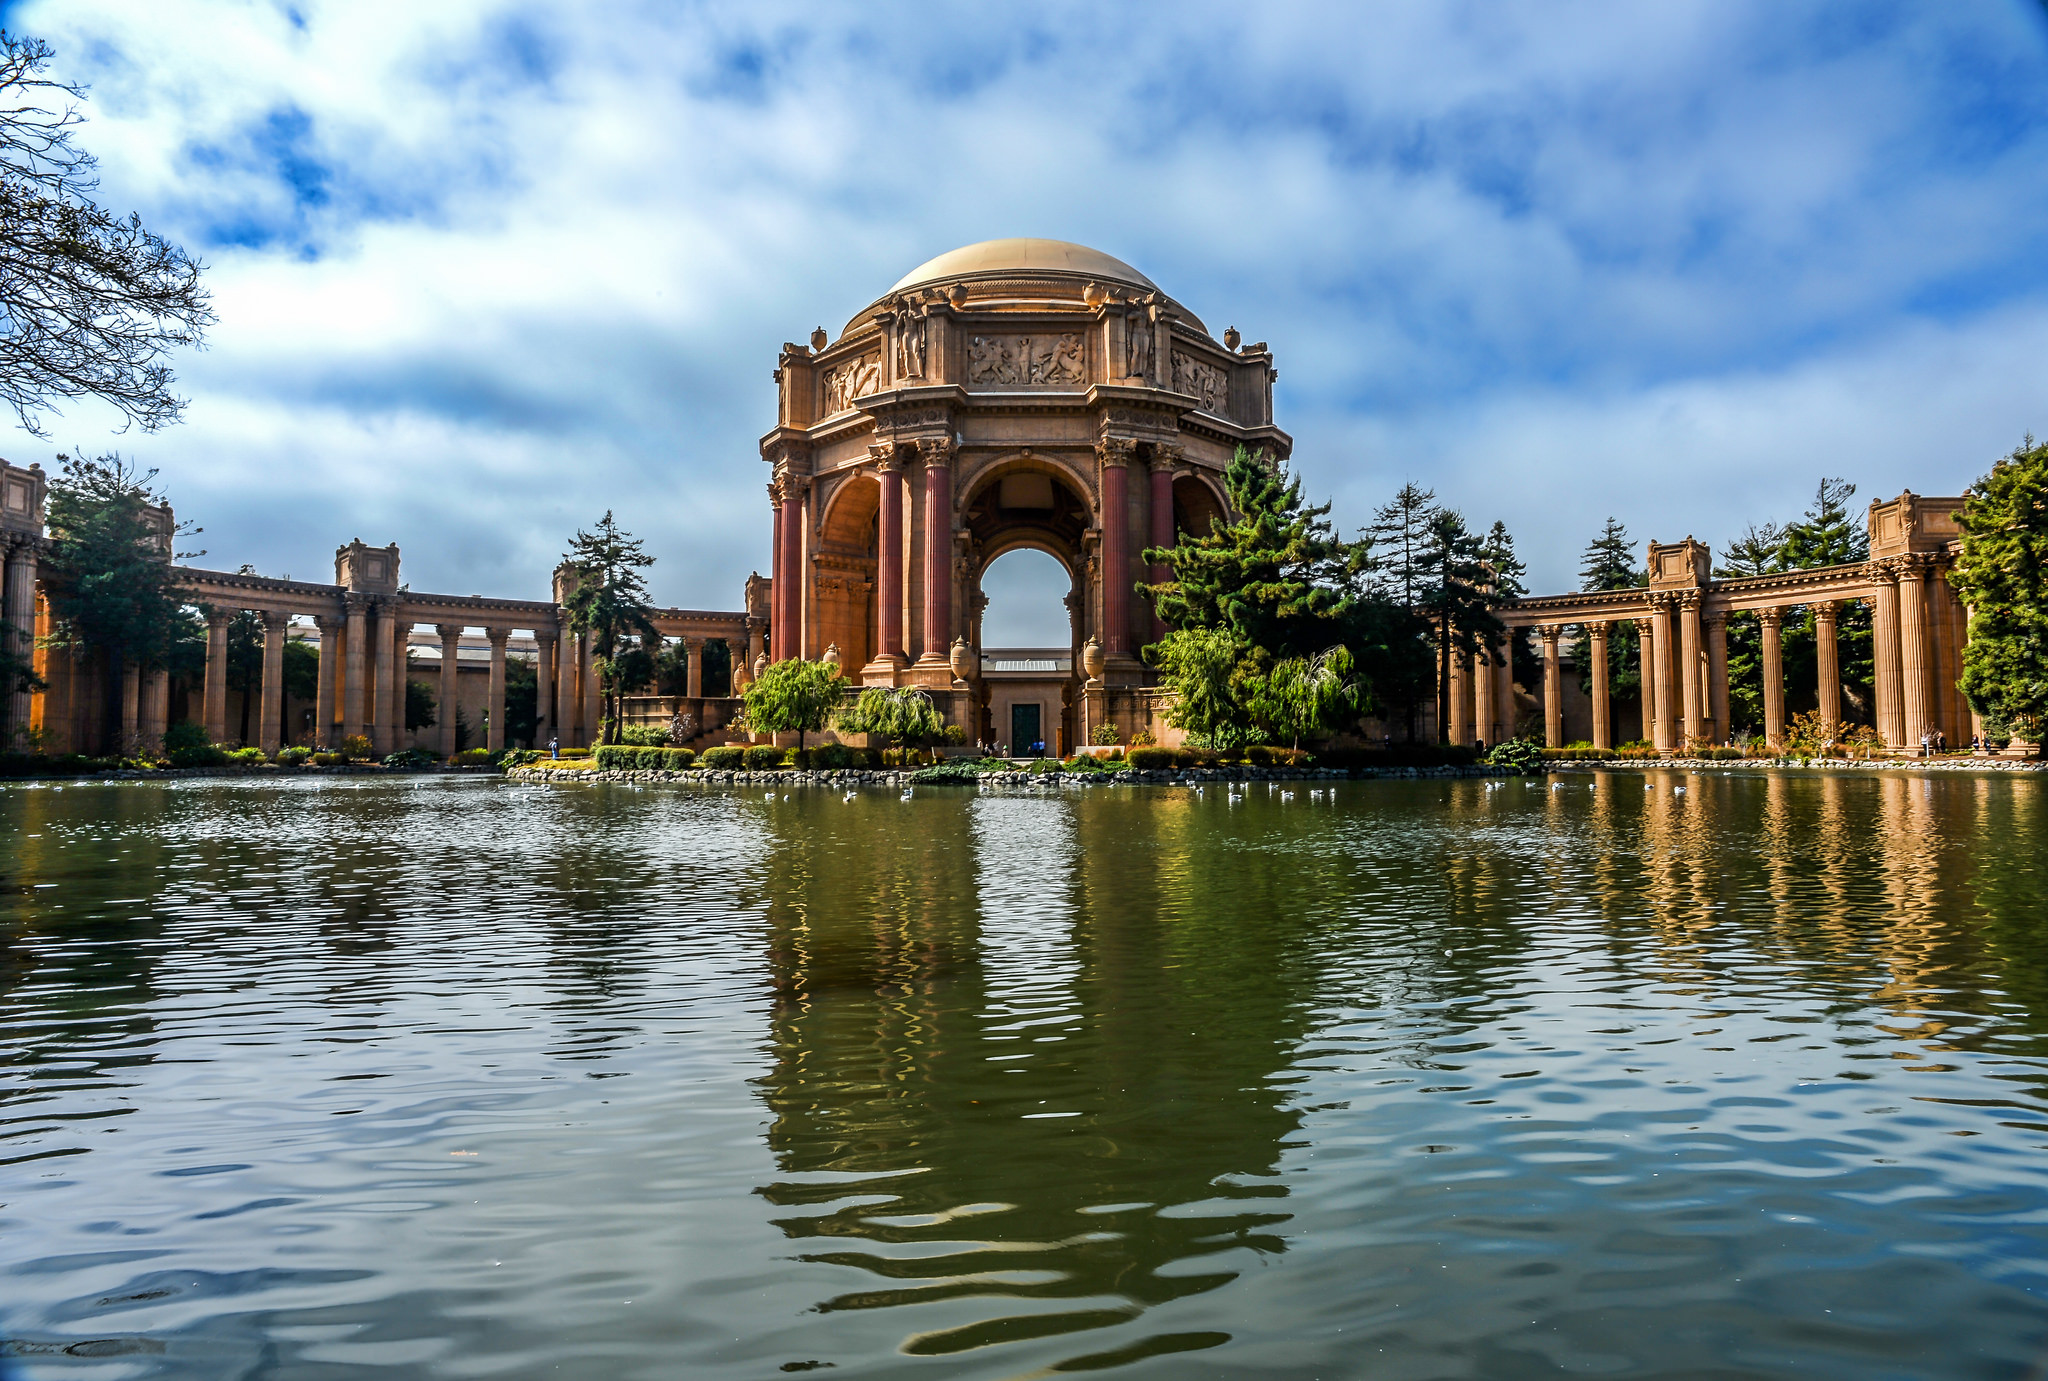 Palace of Fine Arts rotunda and colonnade with pond in the foreground.